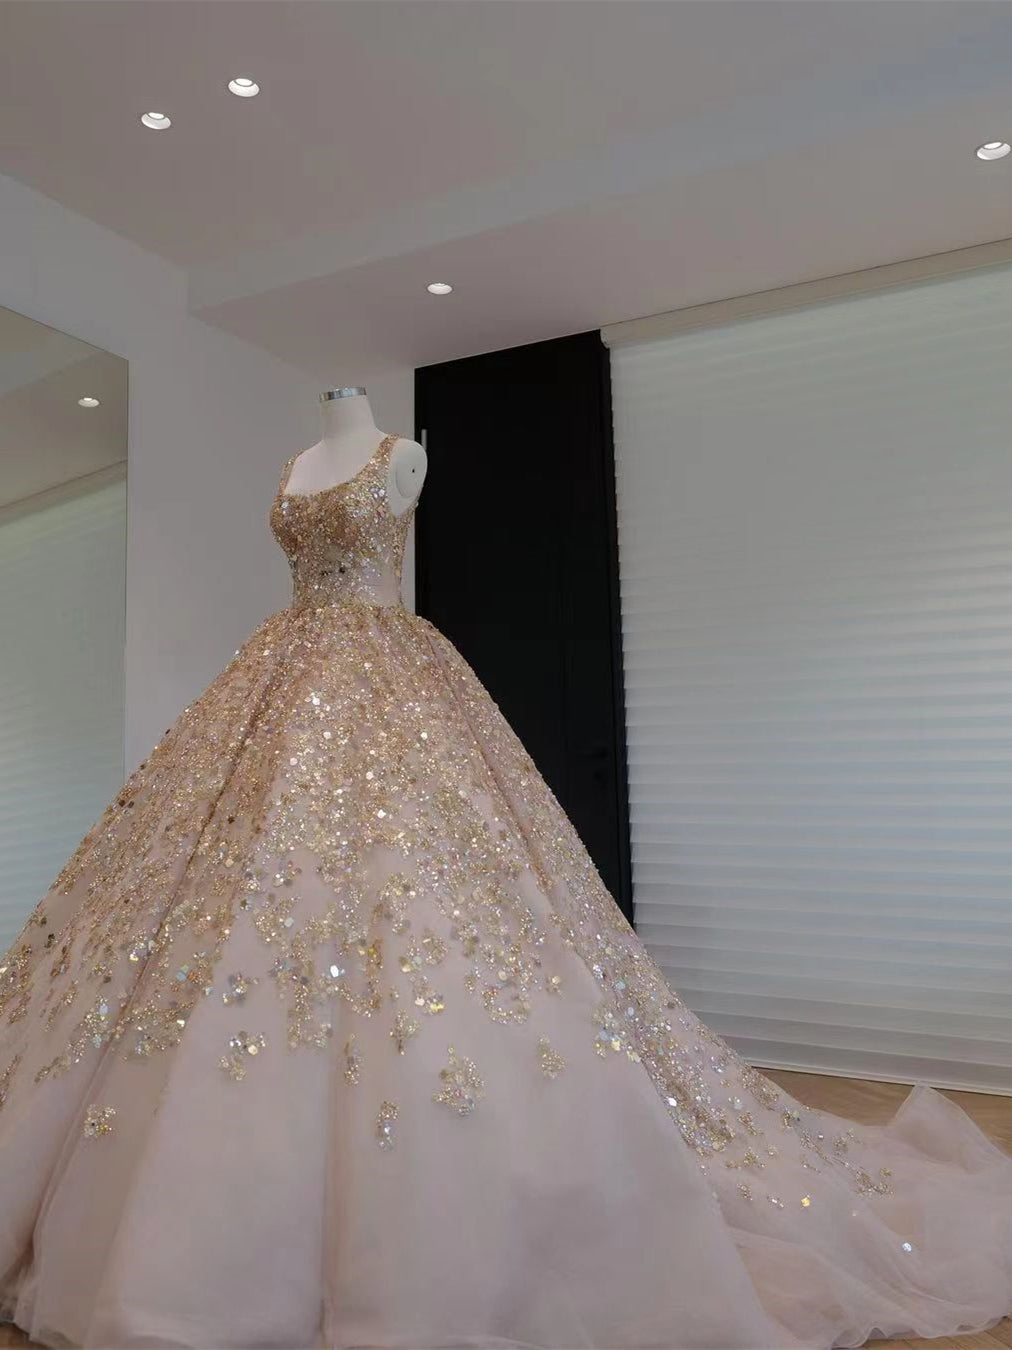 Recreation of Taylor Swift The Enchanted Champagne Beaded Ball Gown, Newest Prom Dresses, Celebrity Dresses